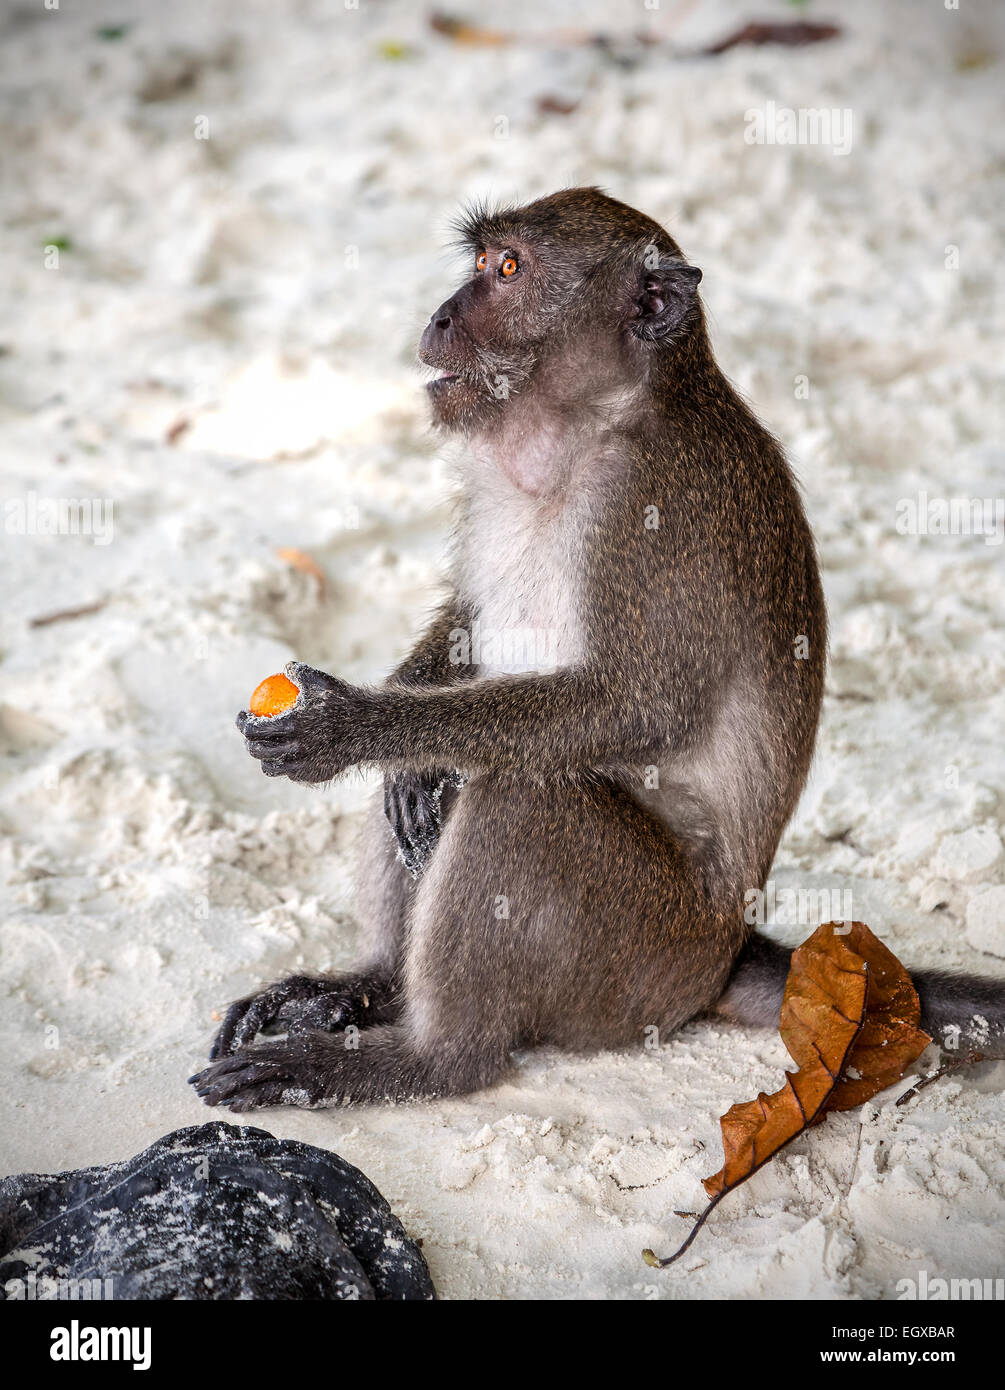 Monkey sitting with fruit on a beach. Stock Photo